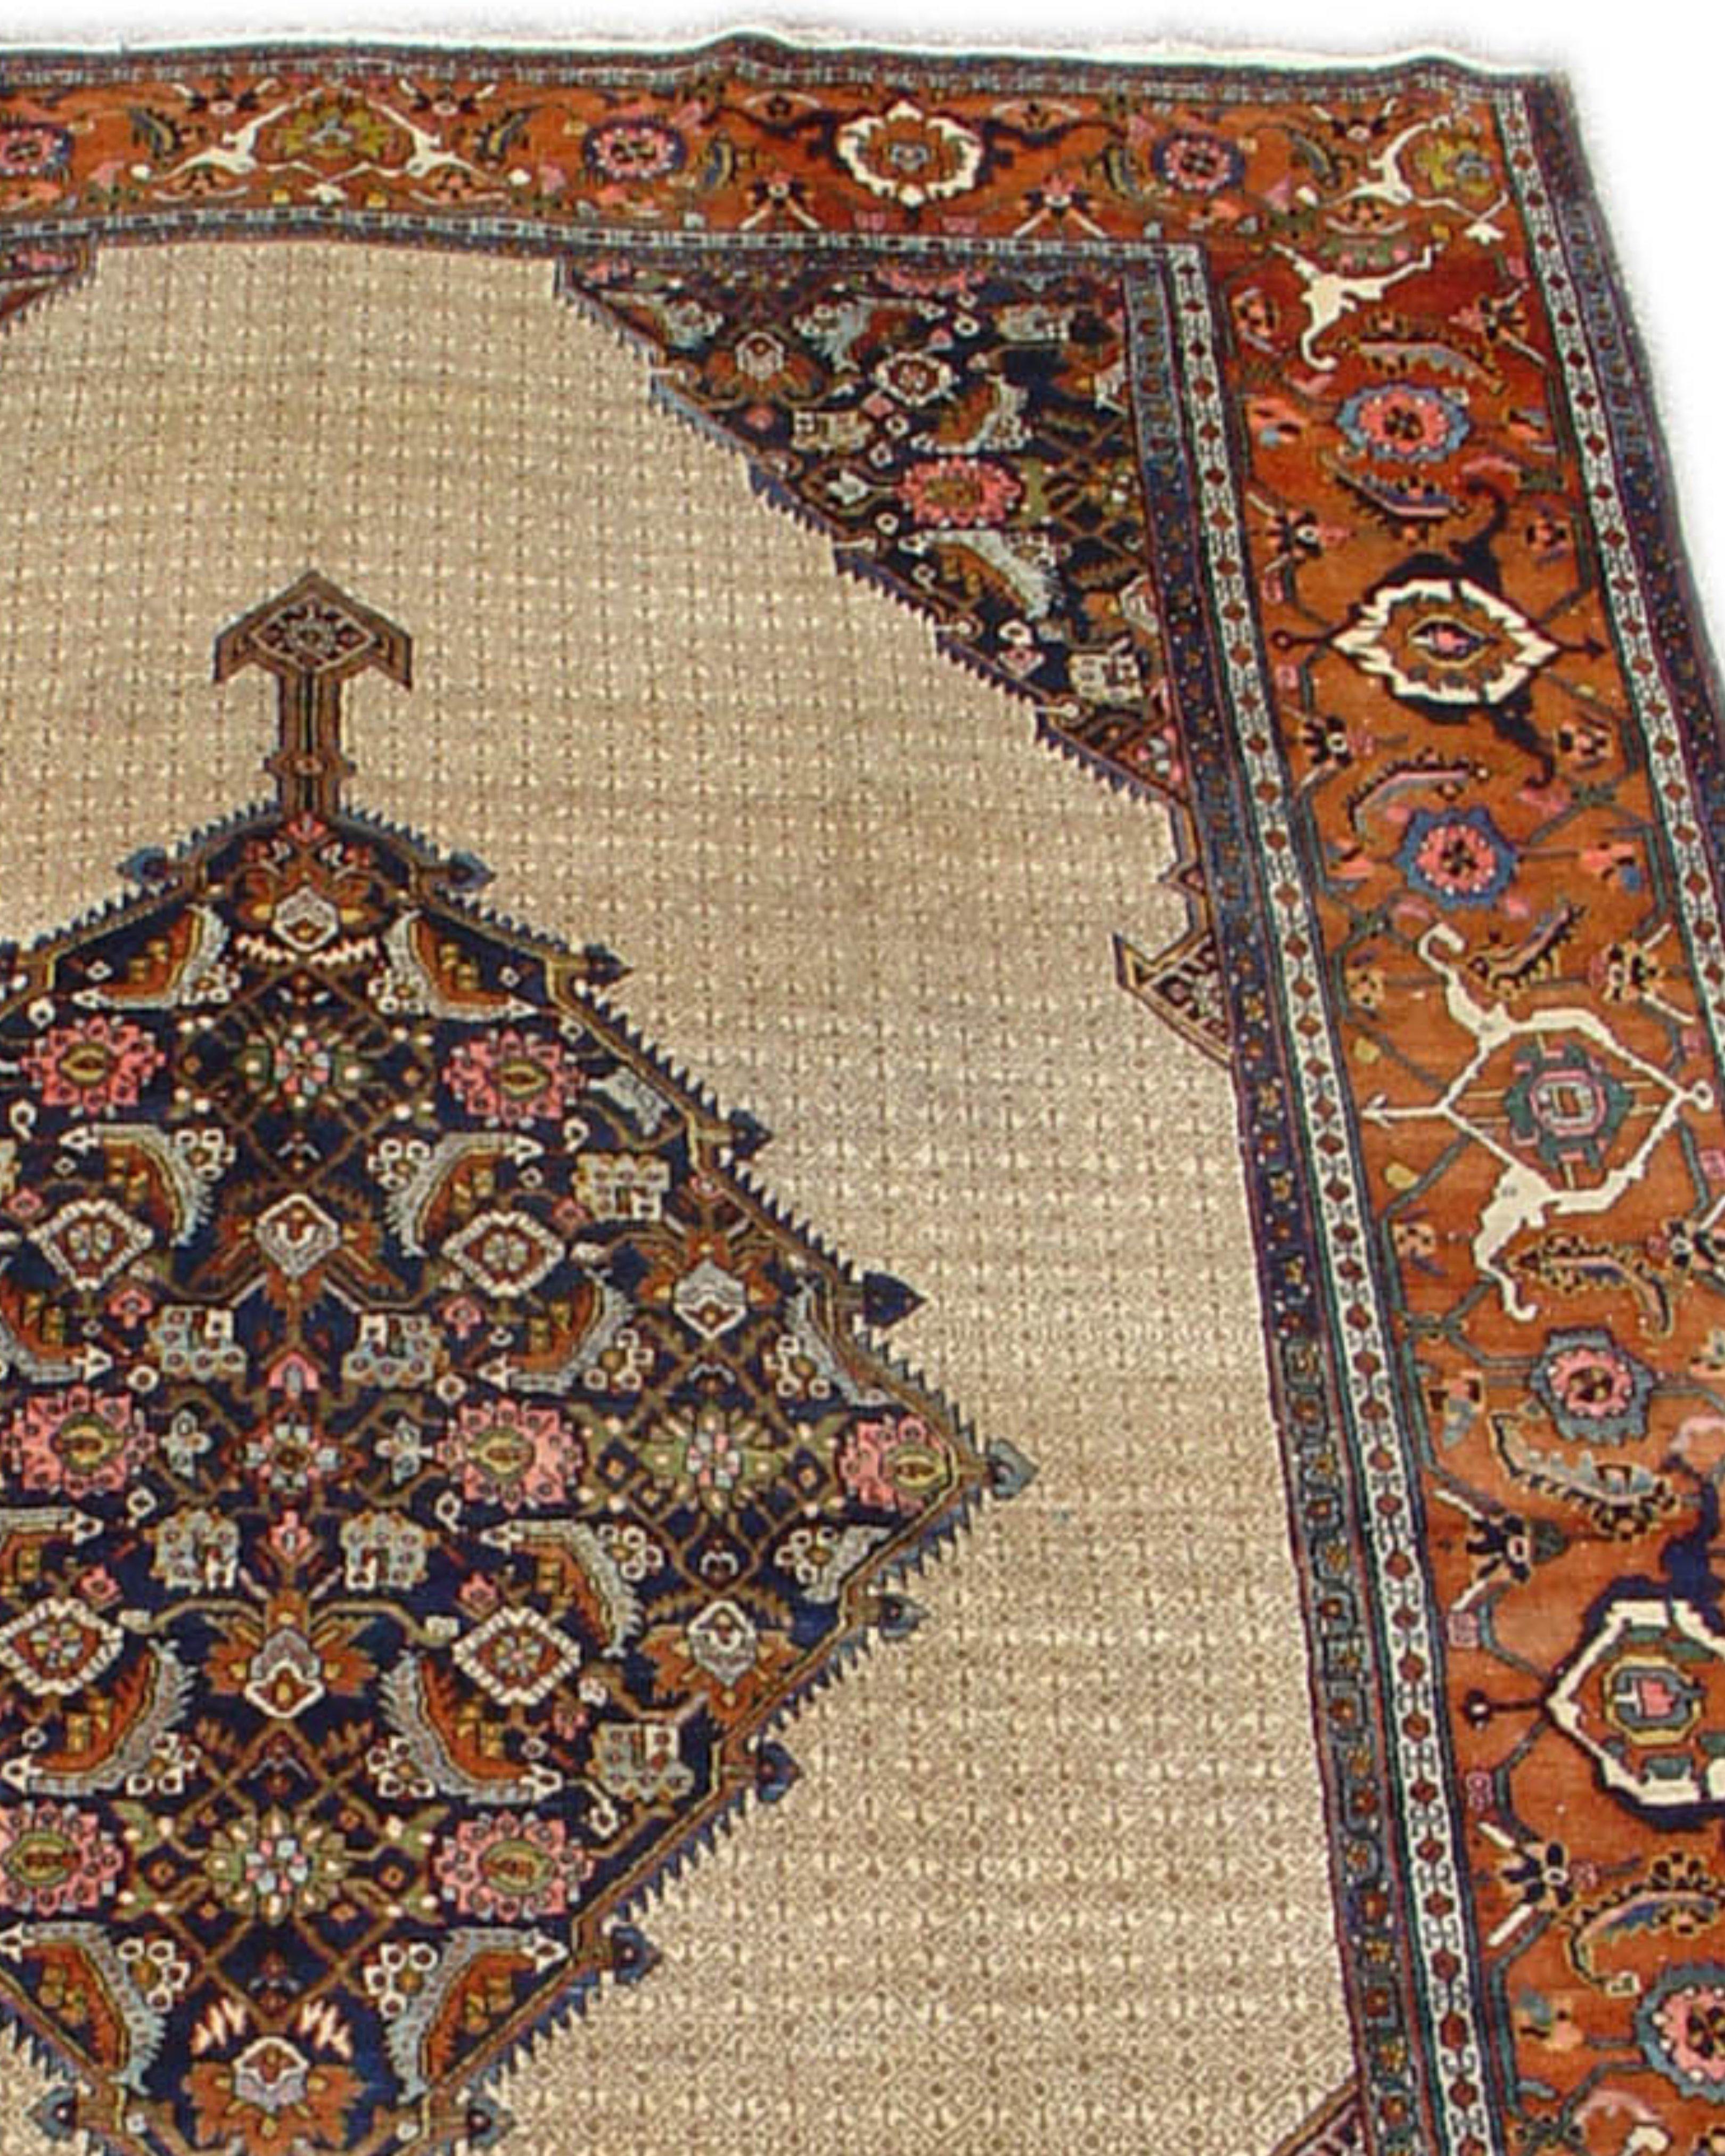 Antique Large Persian Hamadan Carpet, Early 20th Century

During the first half of the twentieth century, rugs from the area of Hamadan in west Persia were some of the favorite smaller pieces imported and used in American homes. These rugs often